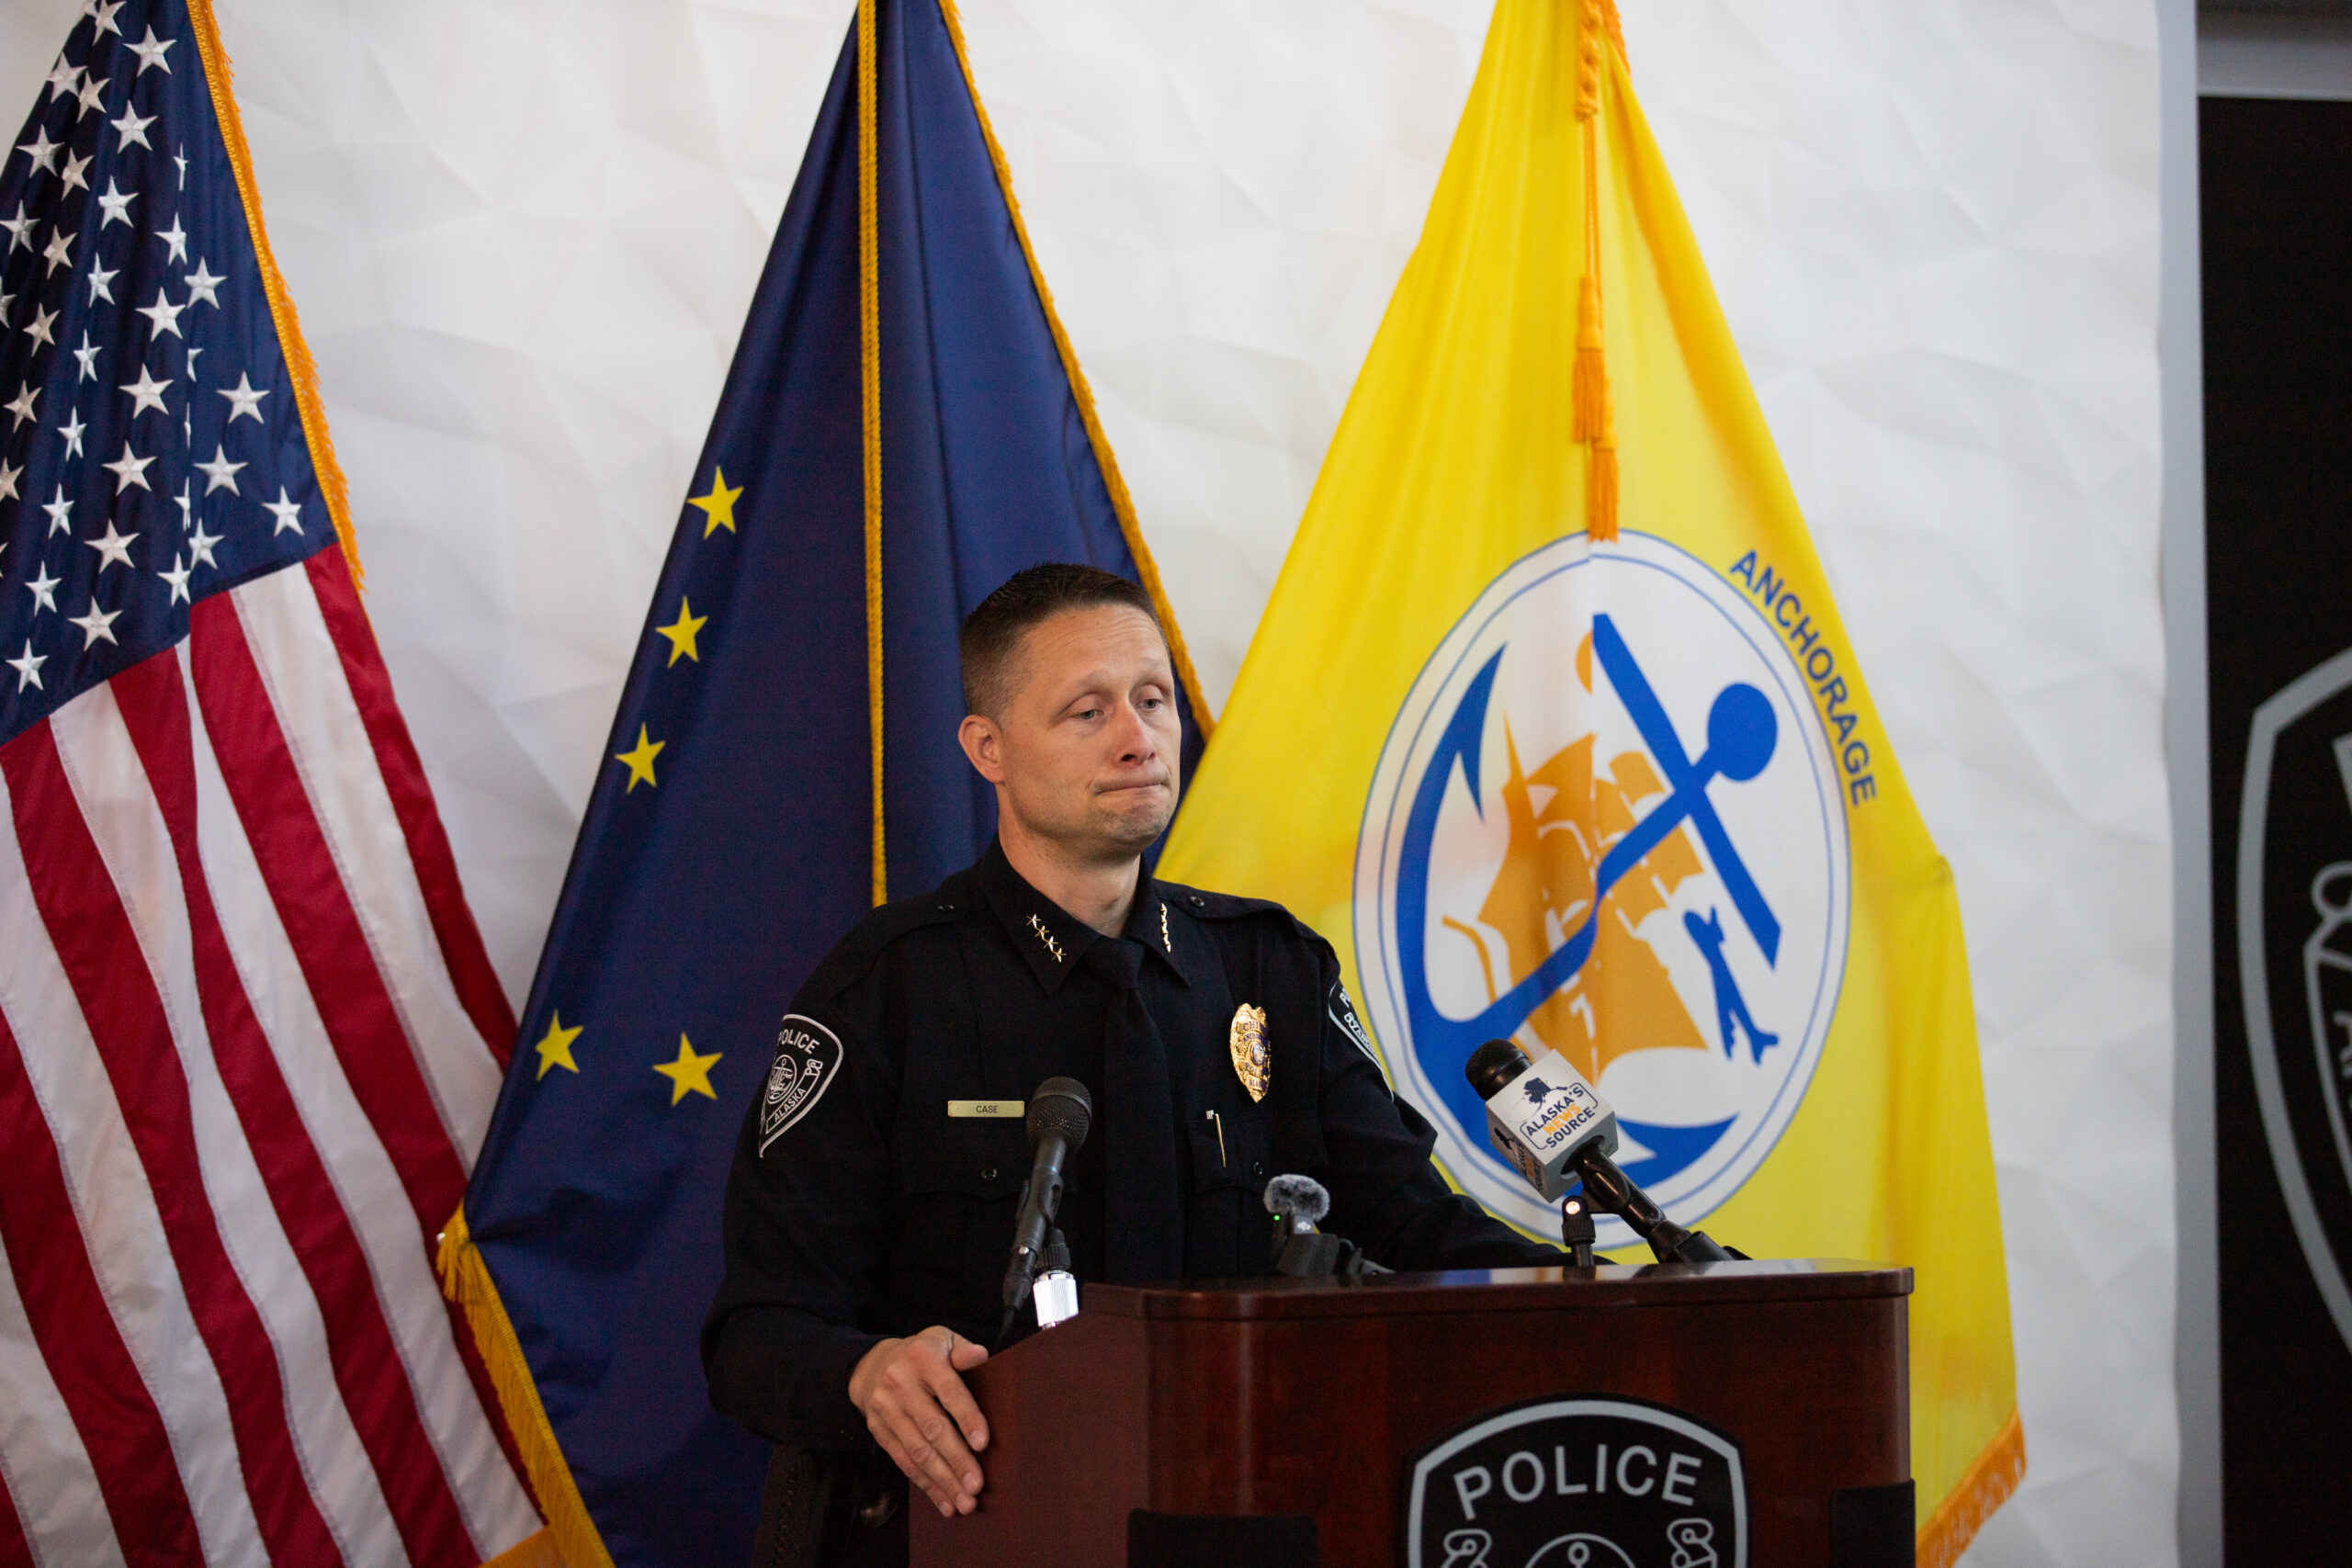 A police man speaking behind a podium with flags in the back